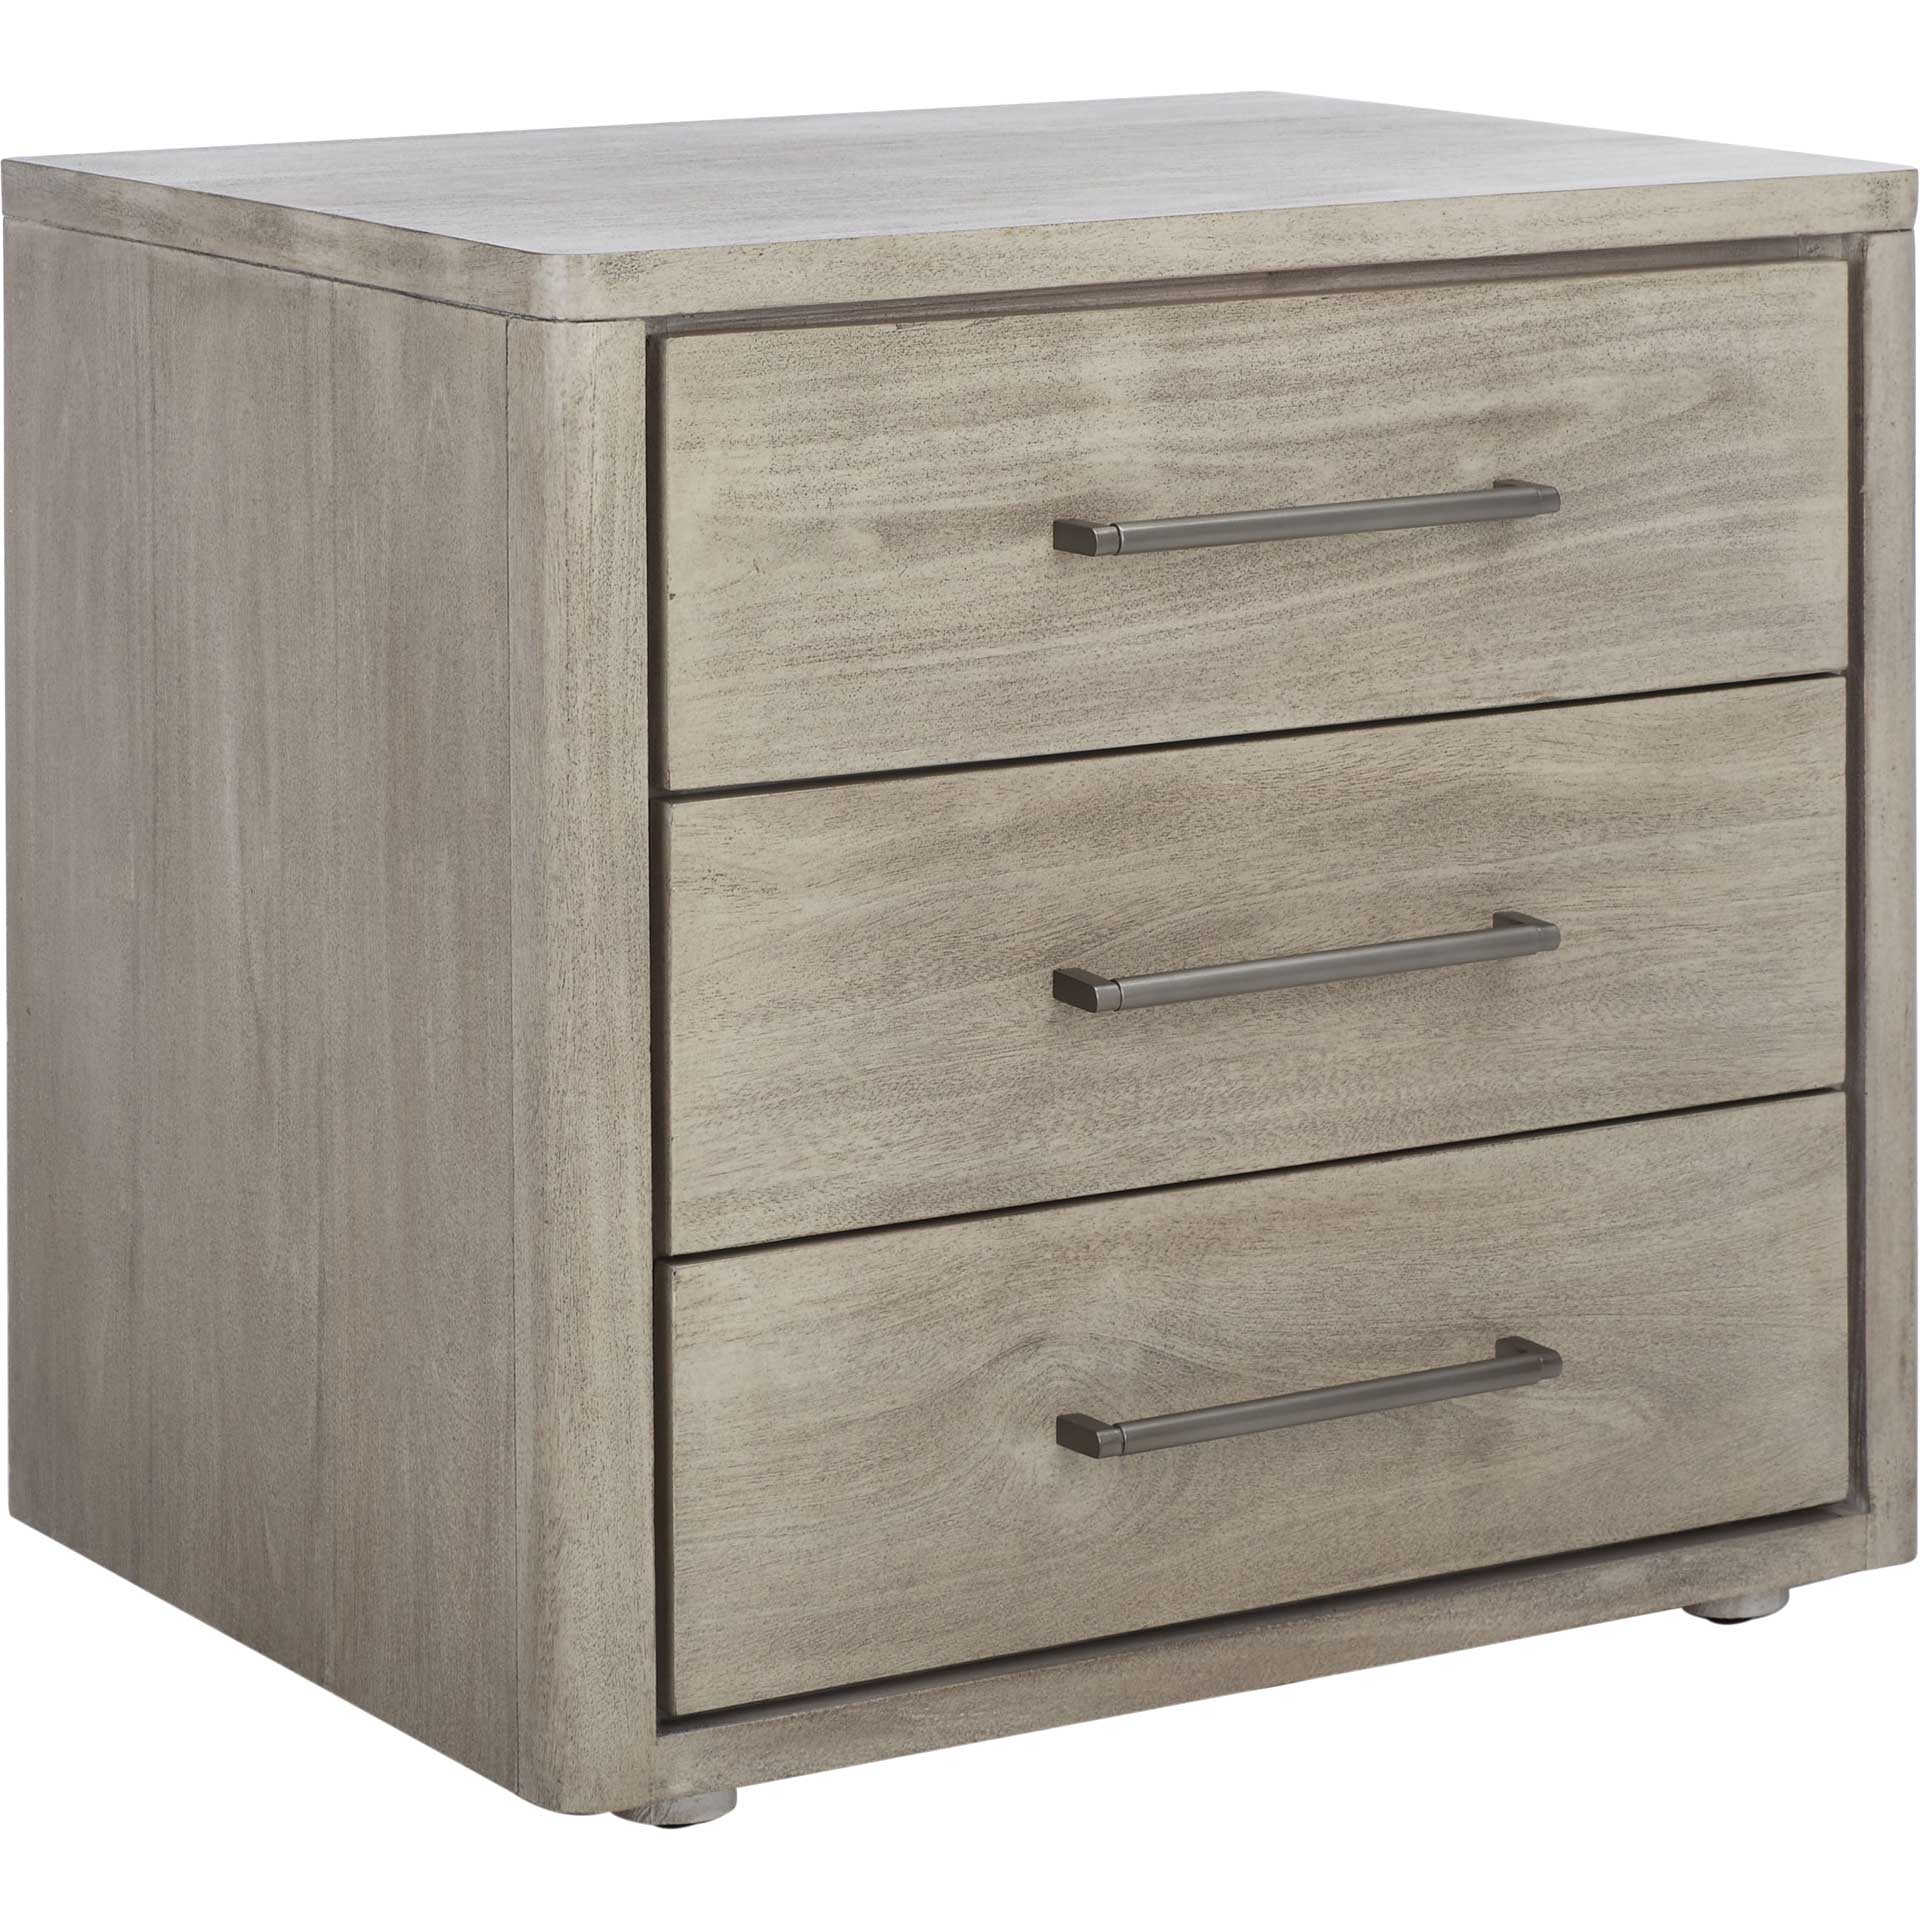 Romilly 3 Drawer Wood Nightstand Light Gray